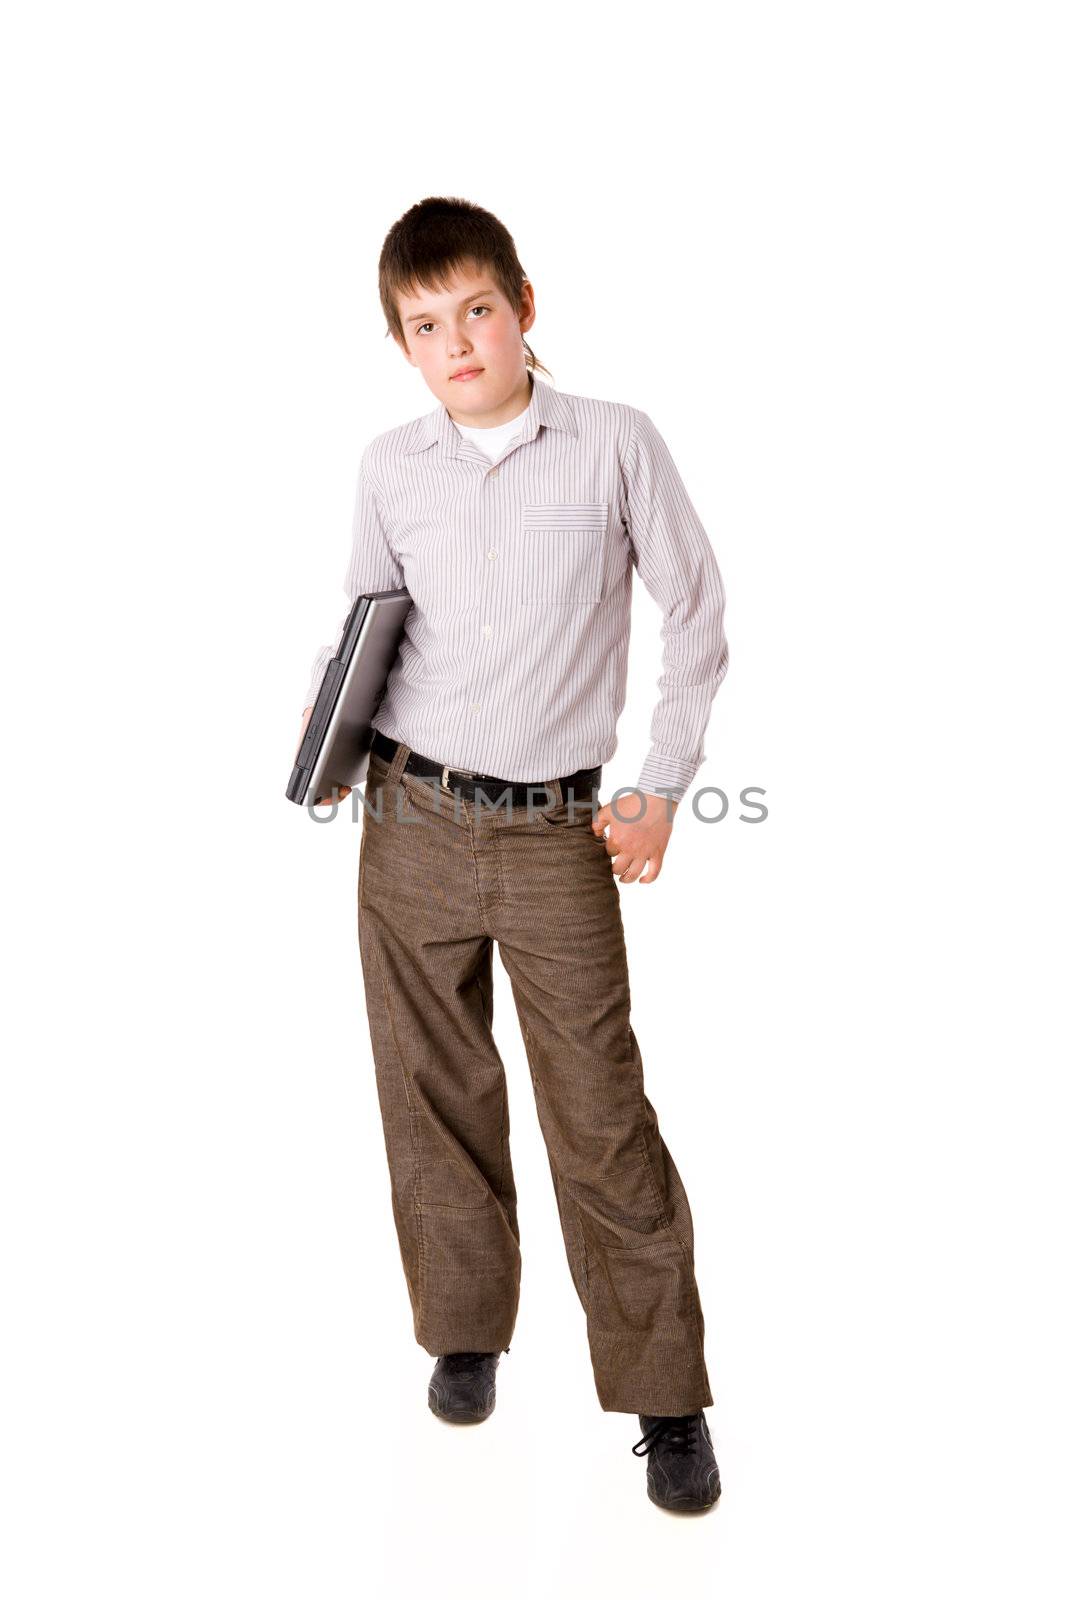 Ten years Boy holding laptop isolated on white